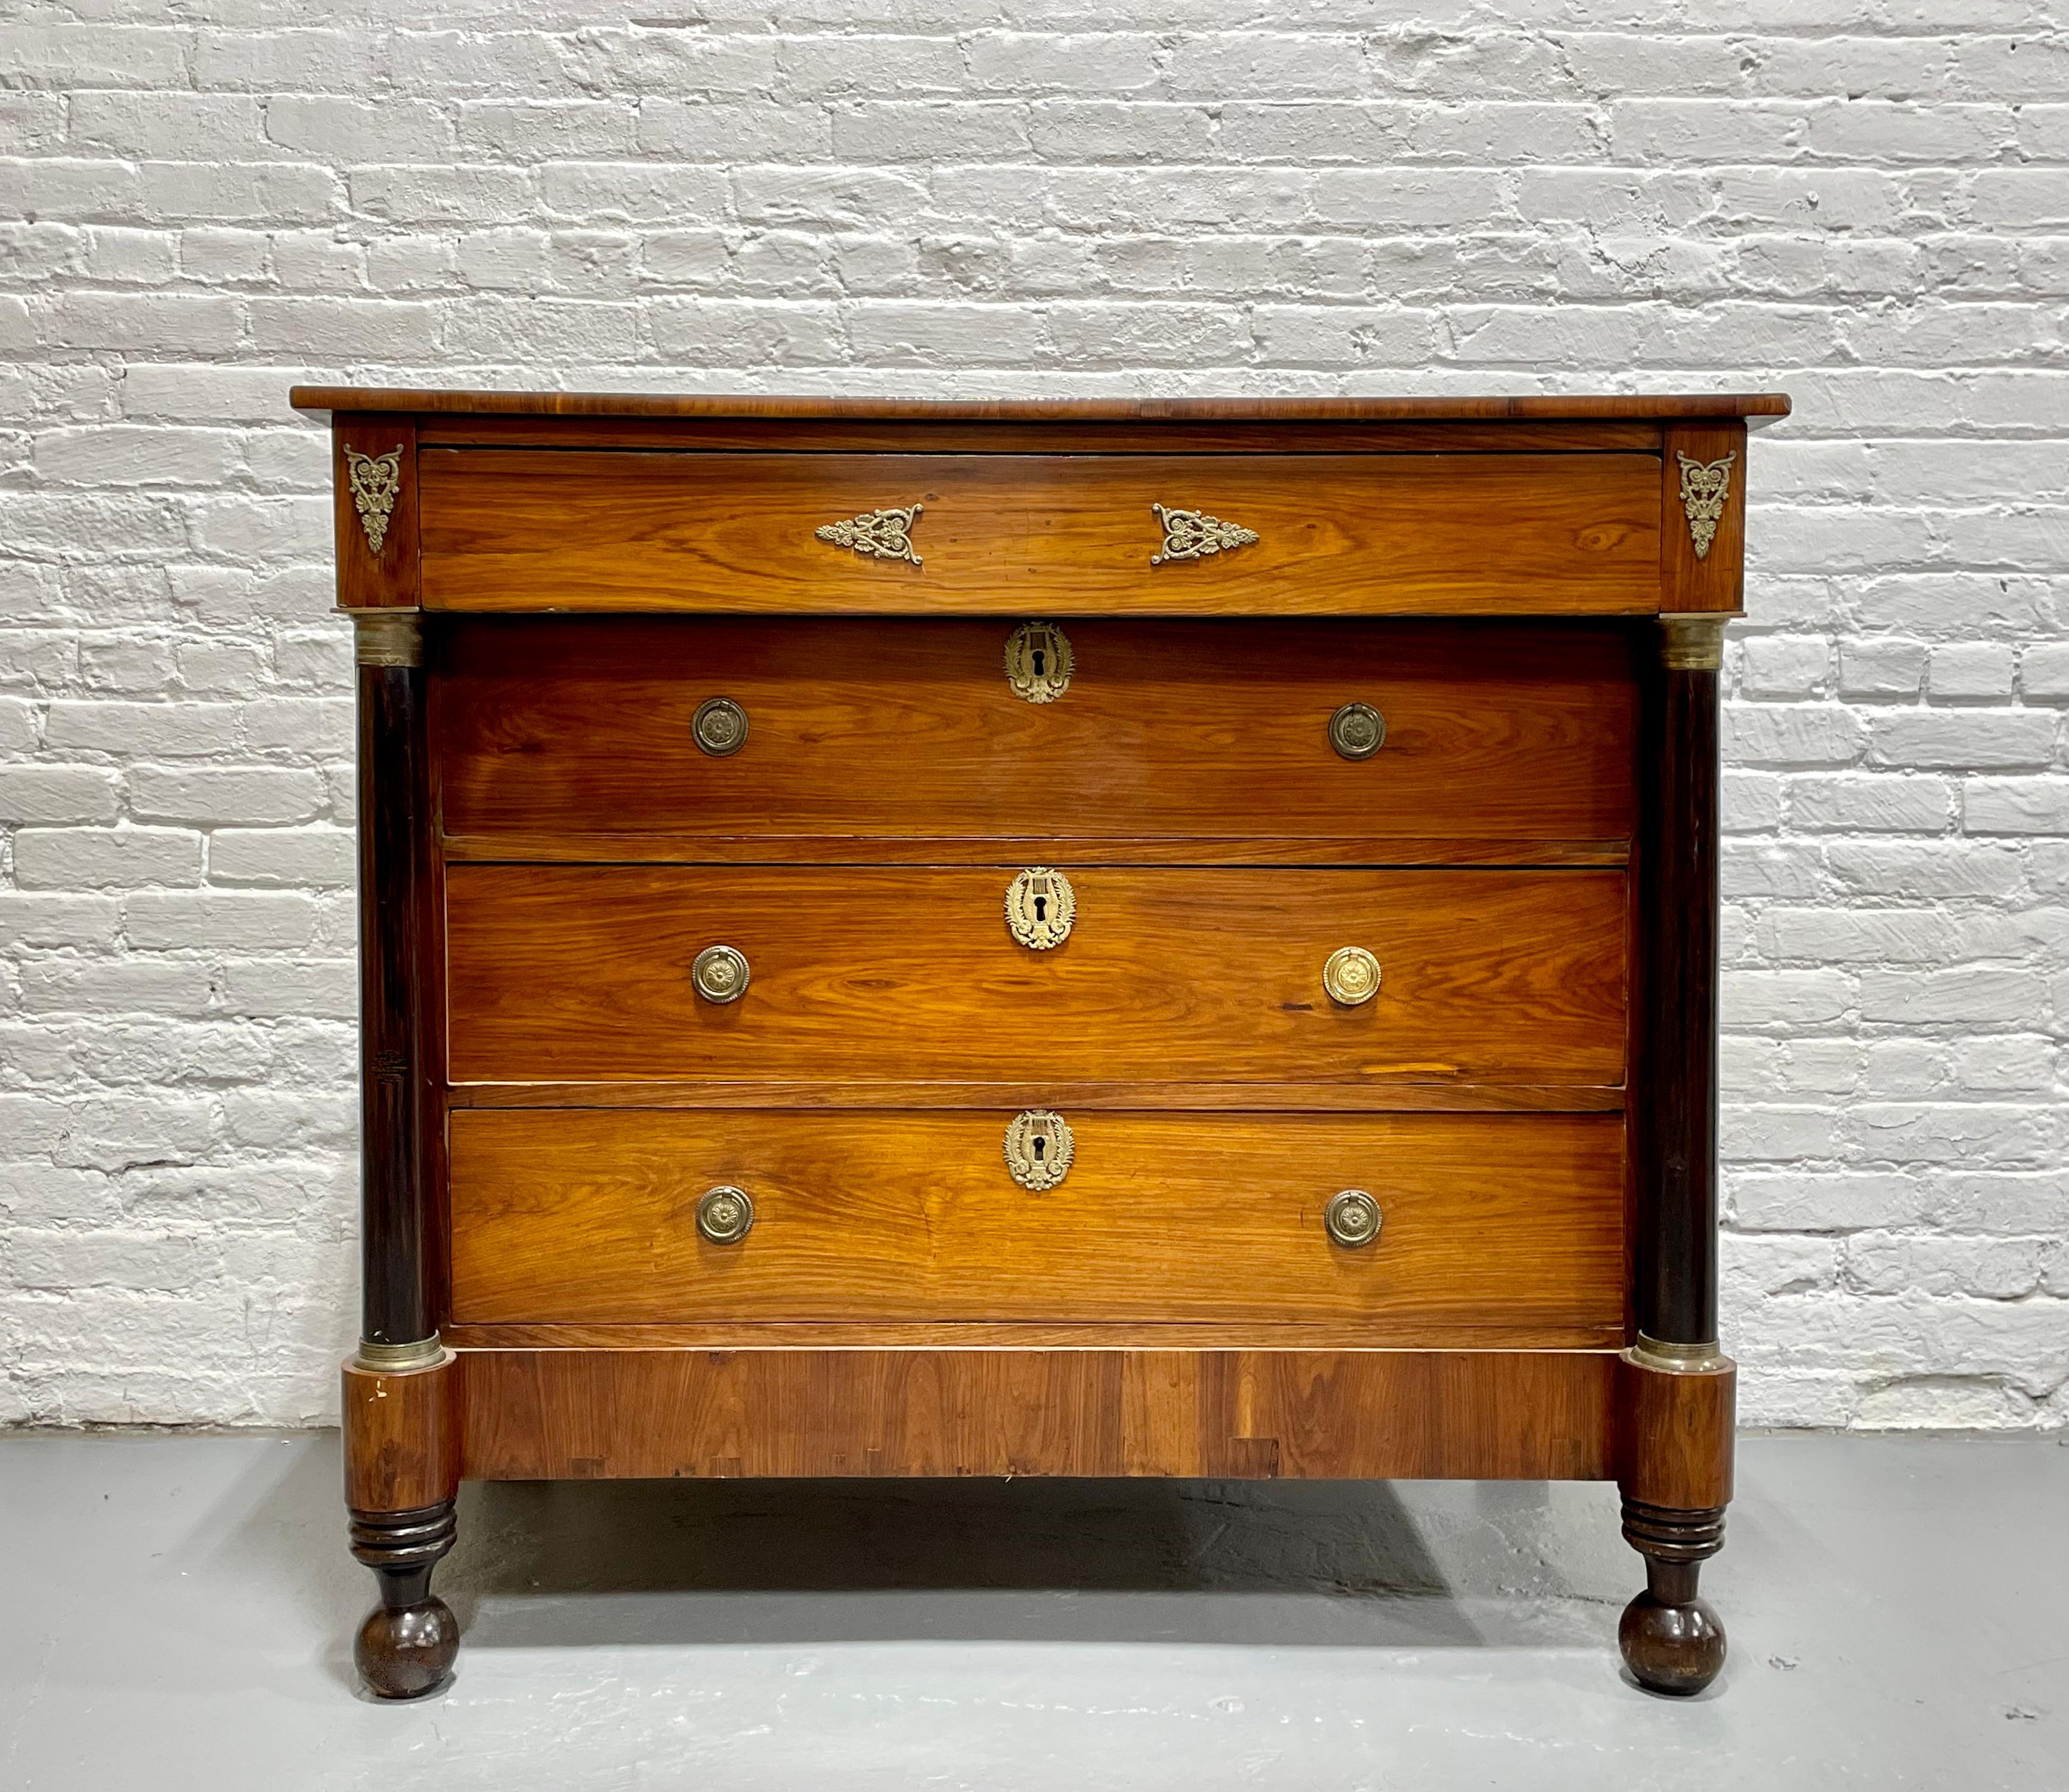 Classic French Empire Chest made from rosewood veneer and featuring ebonized front columns, c. 1810. Iconic of the Empire style, two ebony black round columns flank the bank of dovetailed drawers. The whole stands on sturdy round turned feet and is